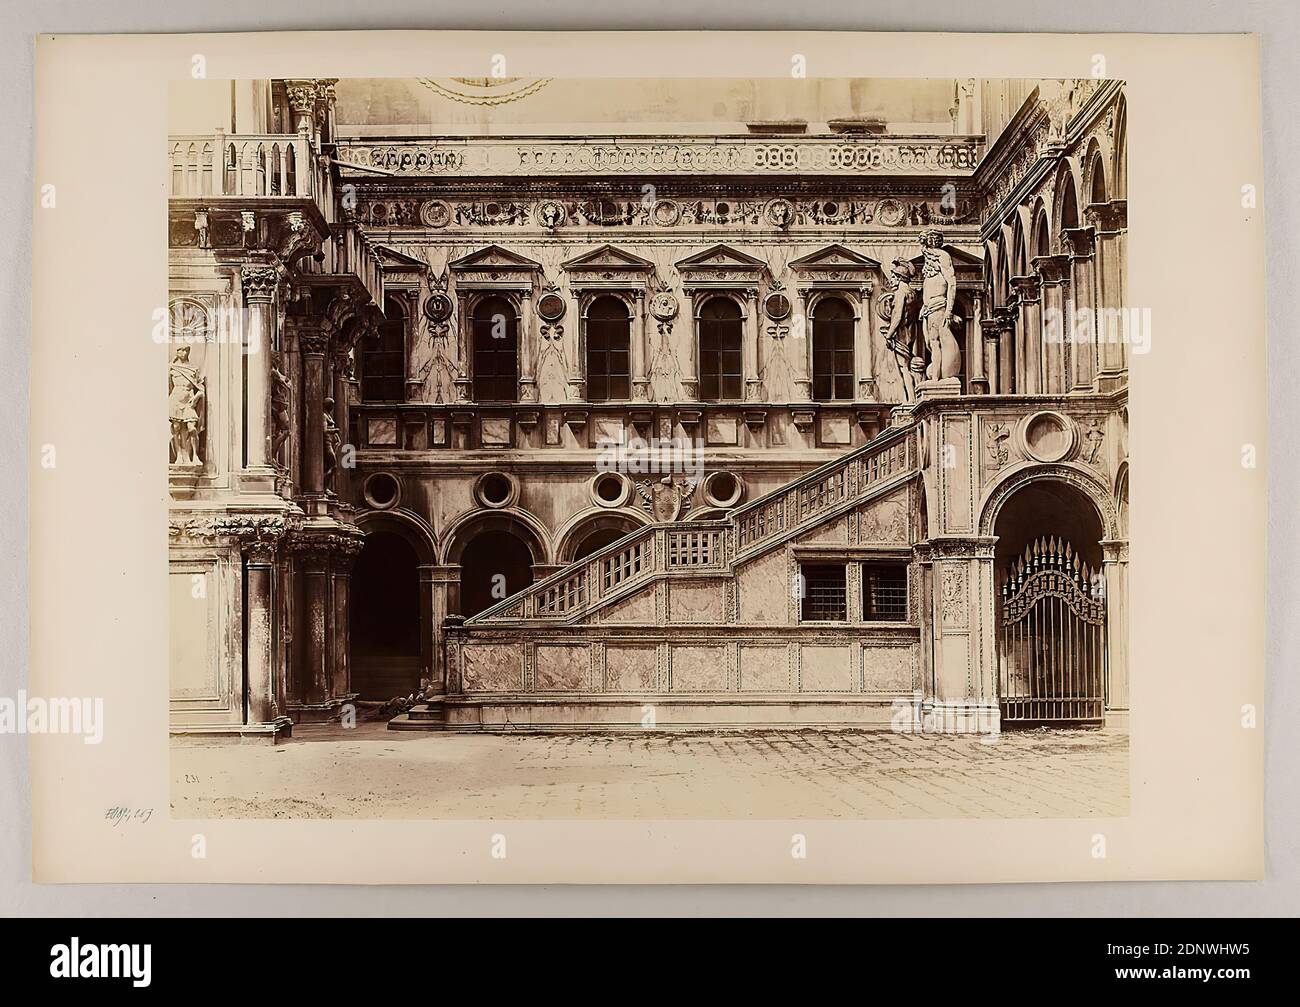 Carlo Naya, Venezia - Palazzo Ducale, Scala dei Giganti, 1892, albumin paper, black and white positive process, sheet size: height: 27,20 cm; width: 35,20 cm, stamp engraving: Naya Fotografo, architectural photography, travel photography, facade, house, building, architecture, hist. building, locality, street Stock Photo